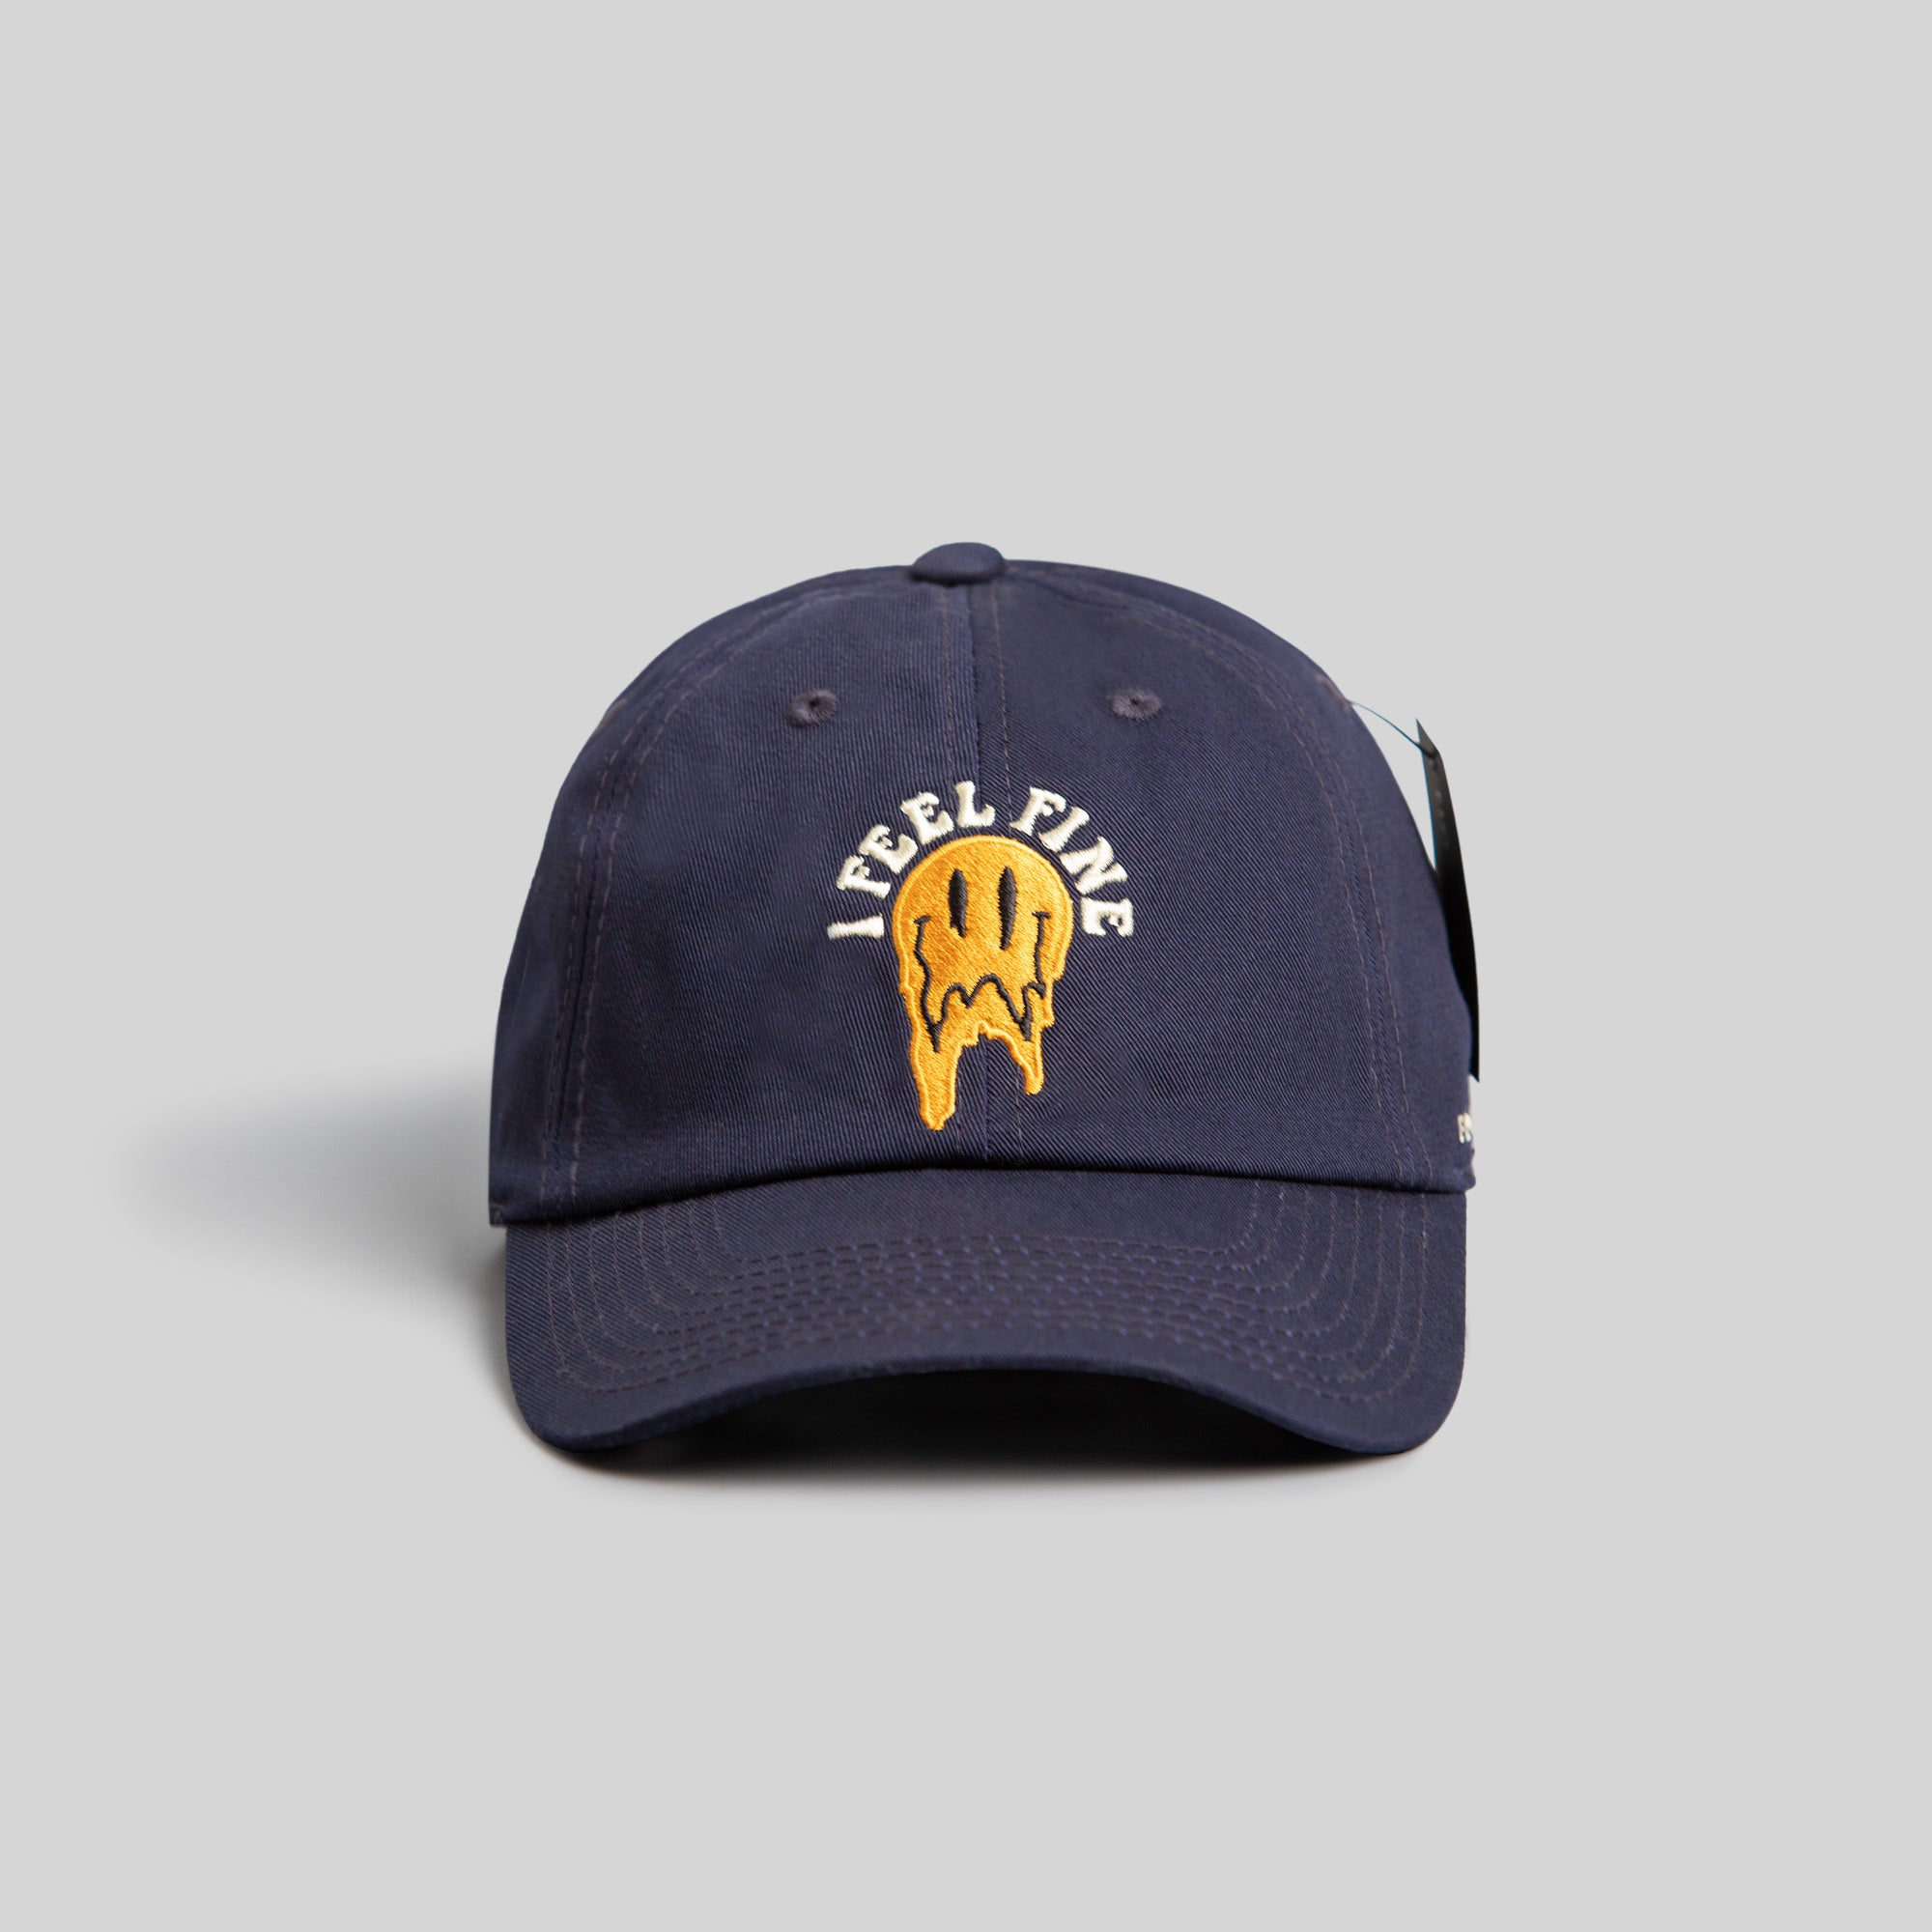 I FEEL FINE DEEP NAVY RELAXED FIT HAT